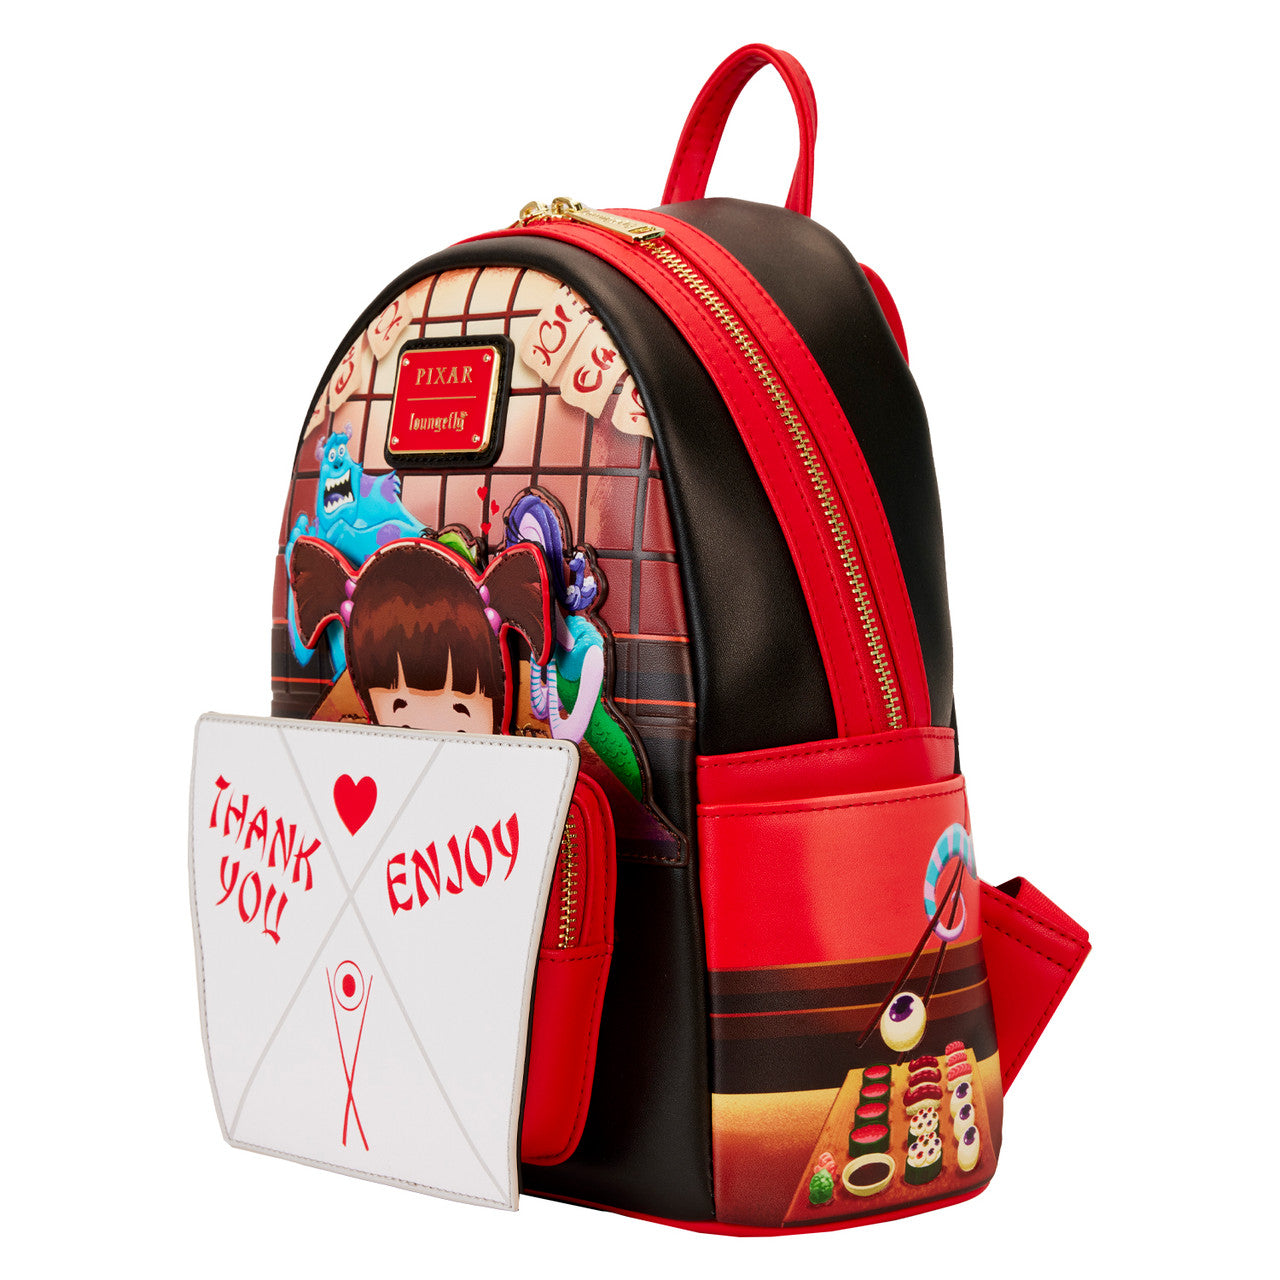 LOUNGEFLY : PIXAR - Monsters Inc Boo Takeout Mini Backpack